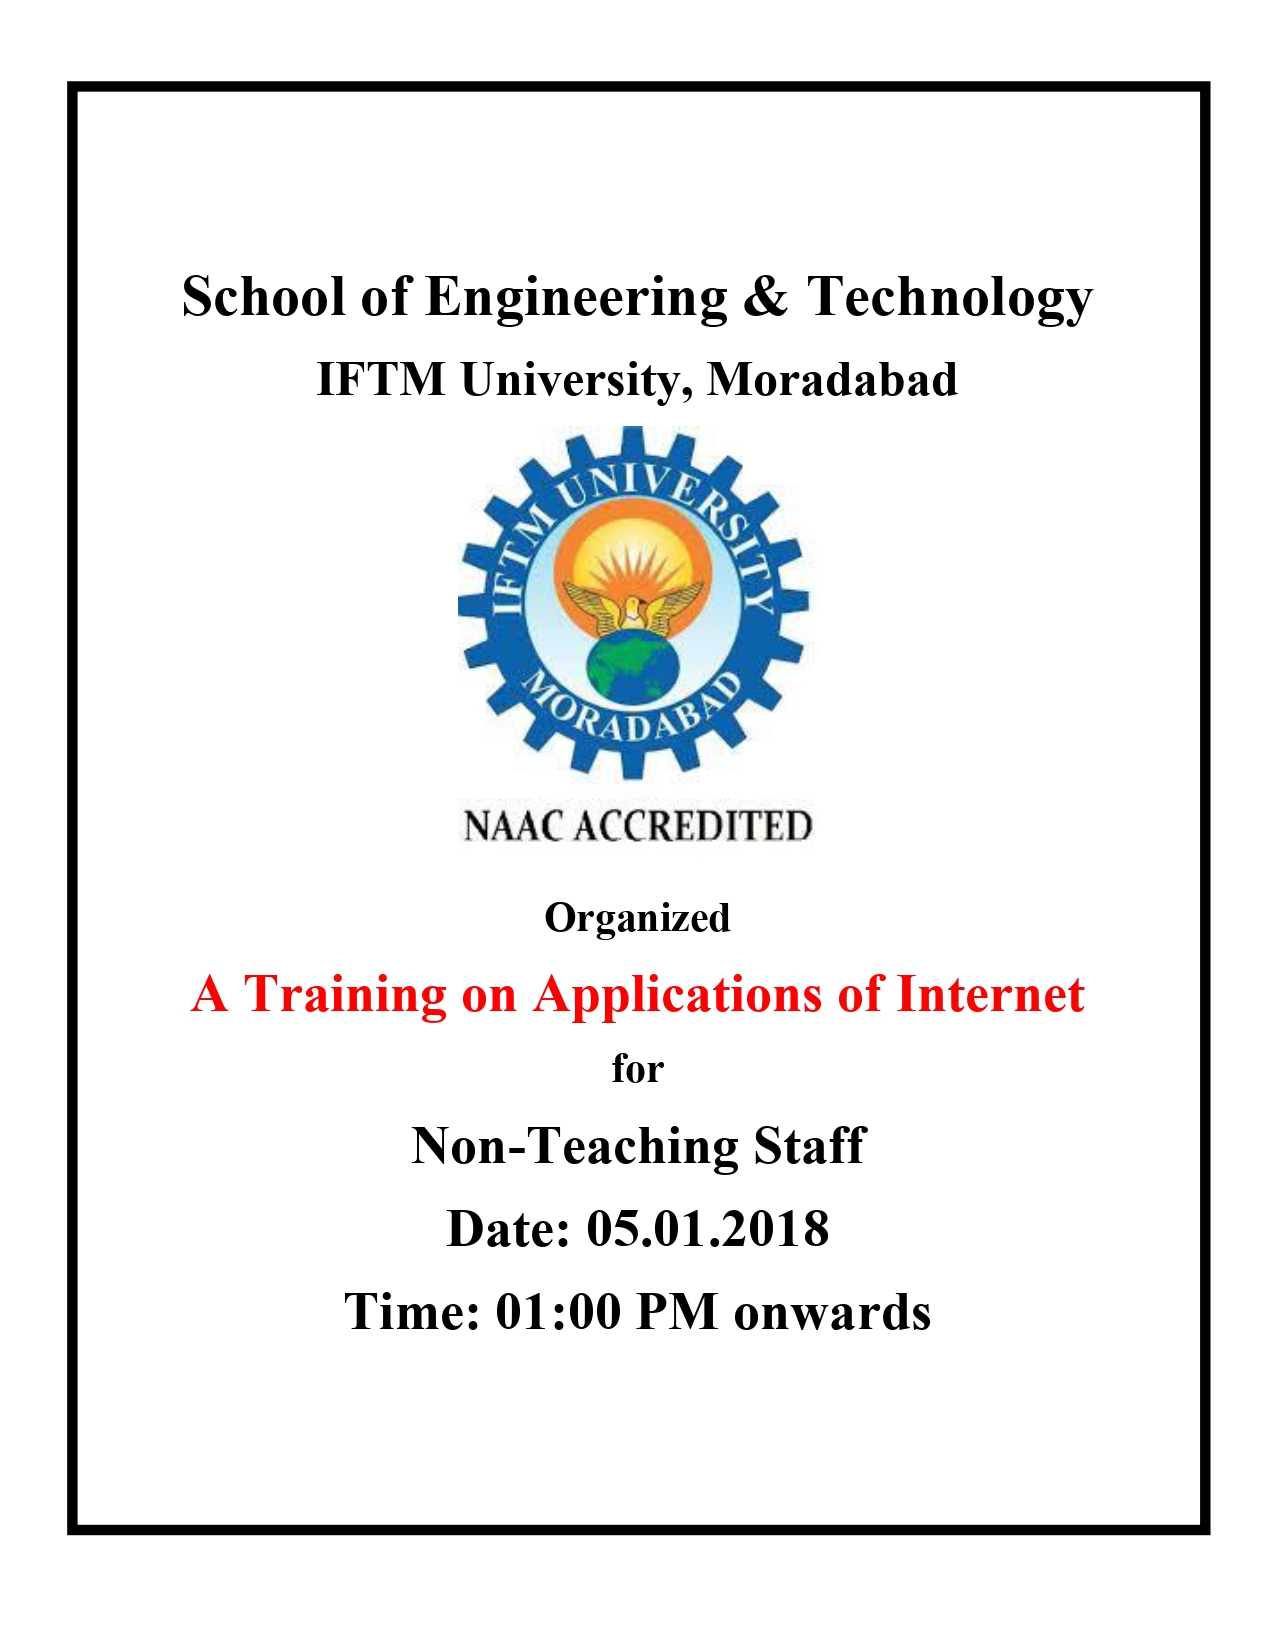 Training on Application of Internet for non-teaching staff